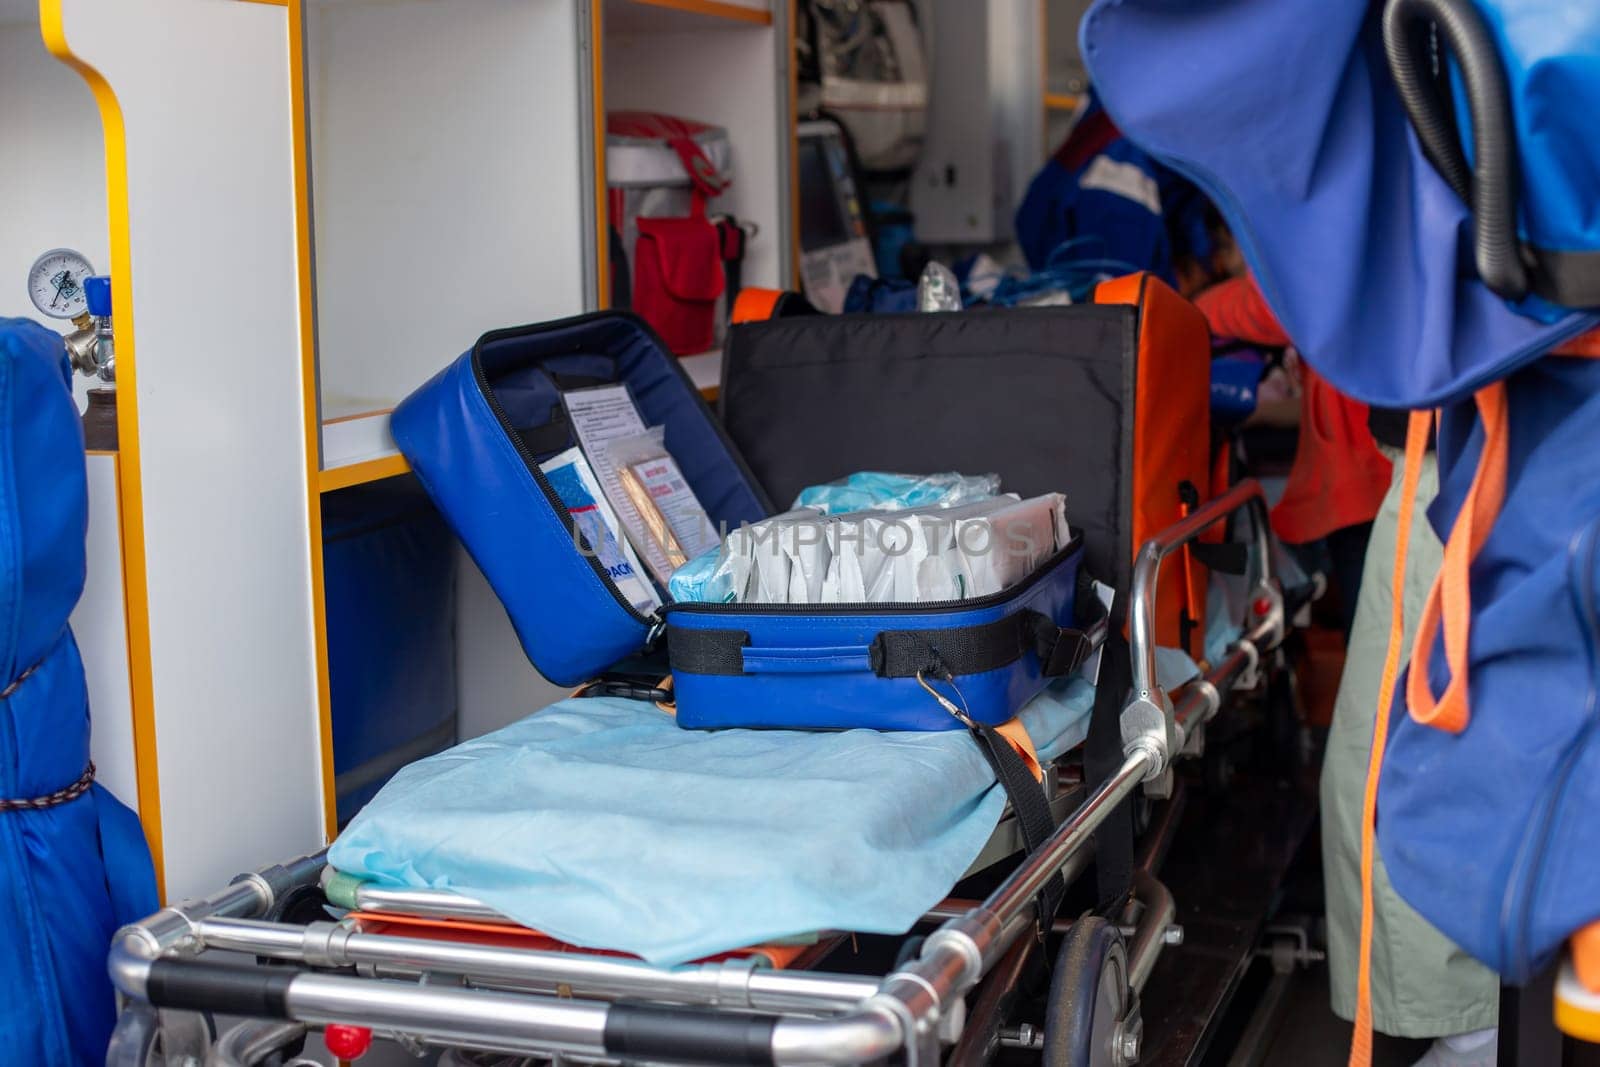 Inside view of an ambulance with medical gear.